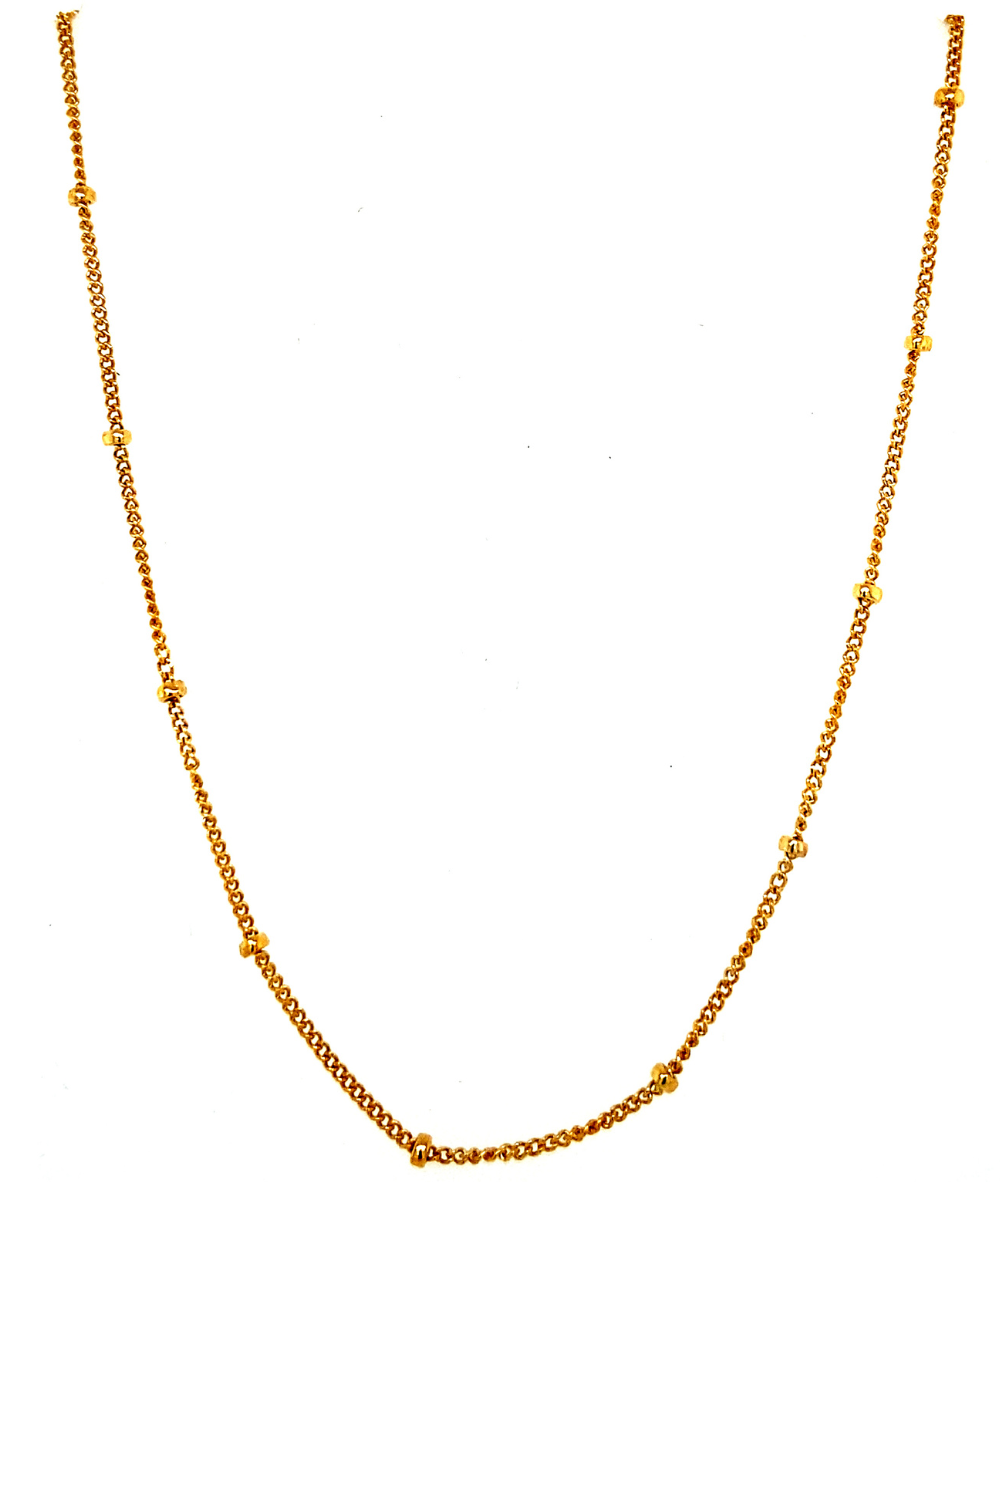 16" Beaded Chain Necklace